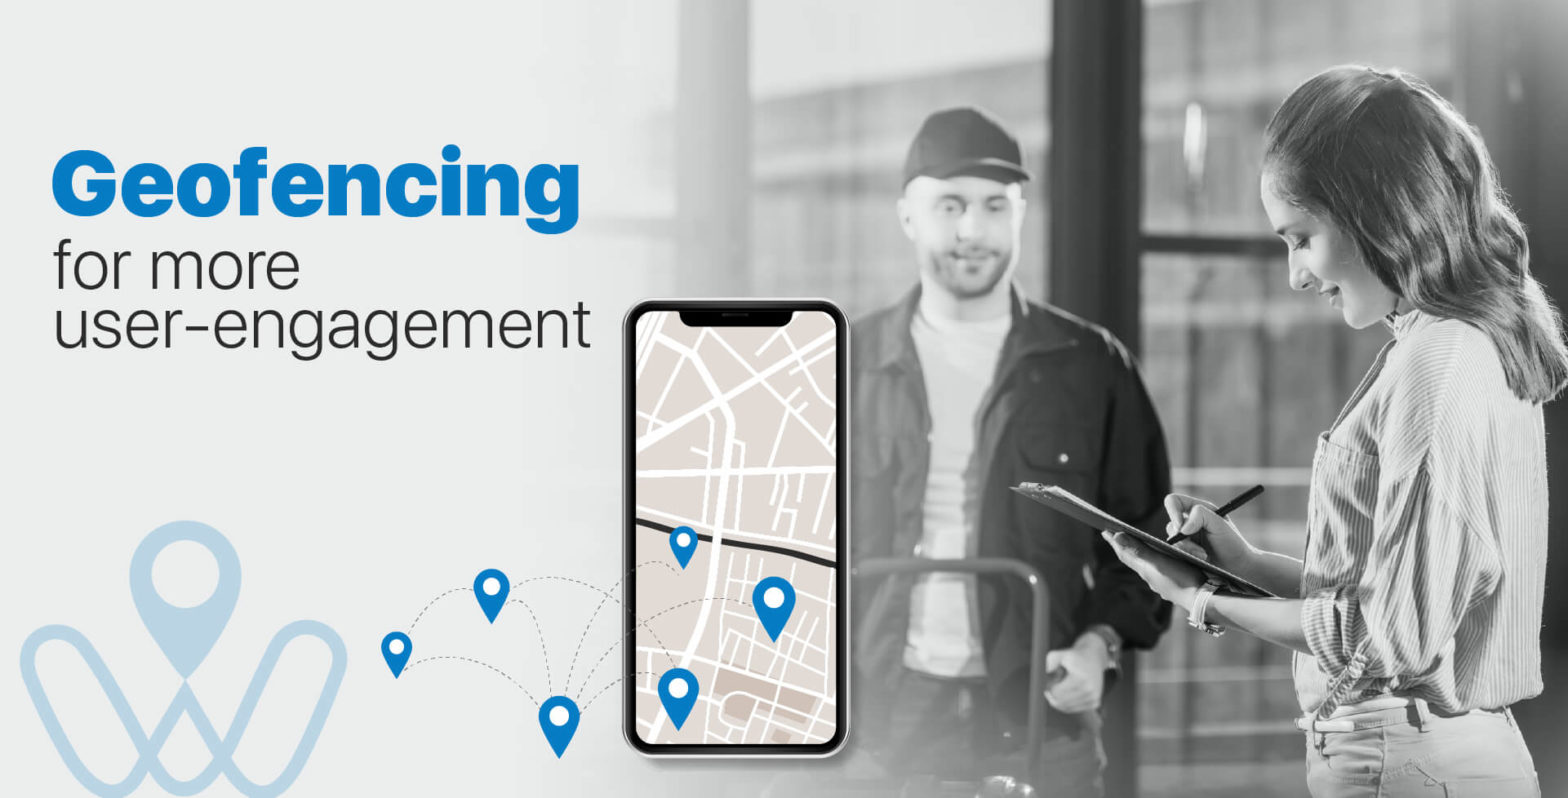 Attract customers with geo-fencing to the business using GPS